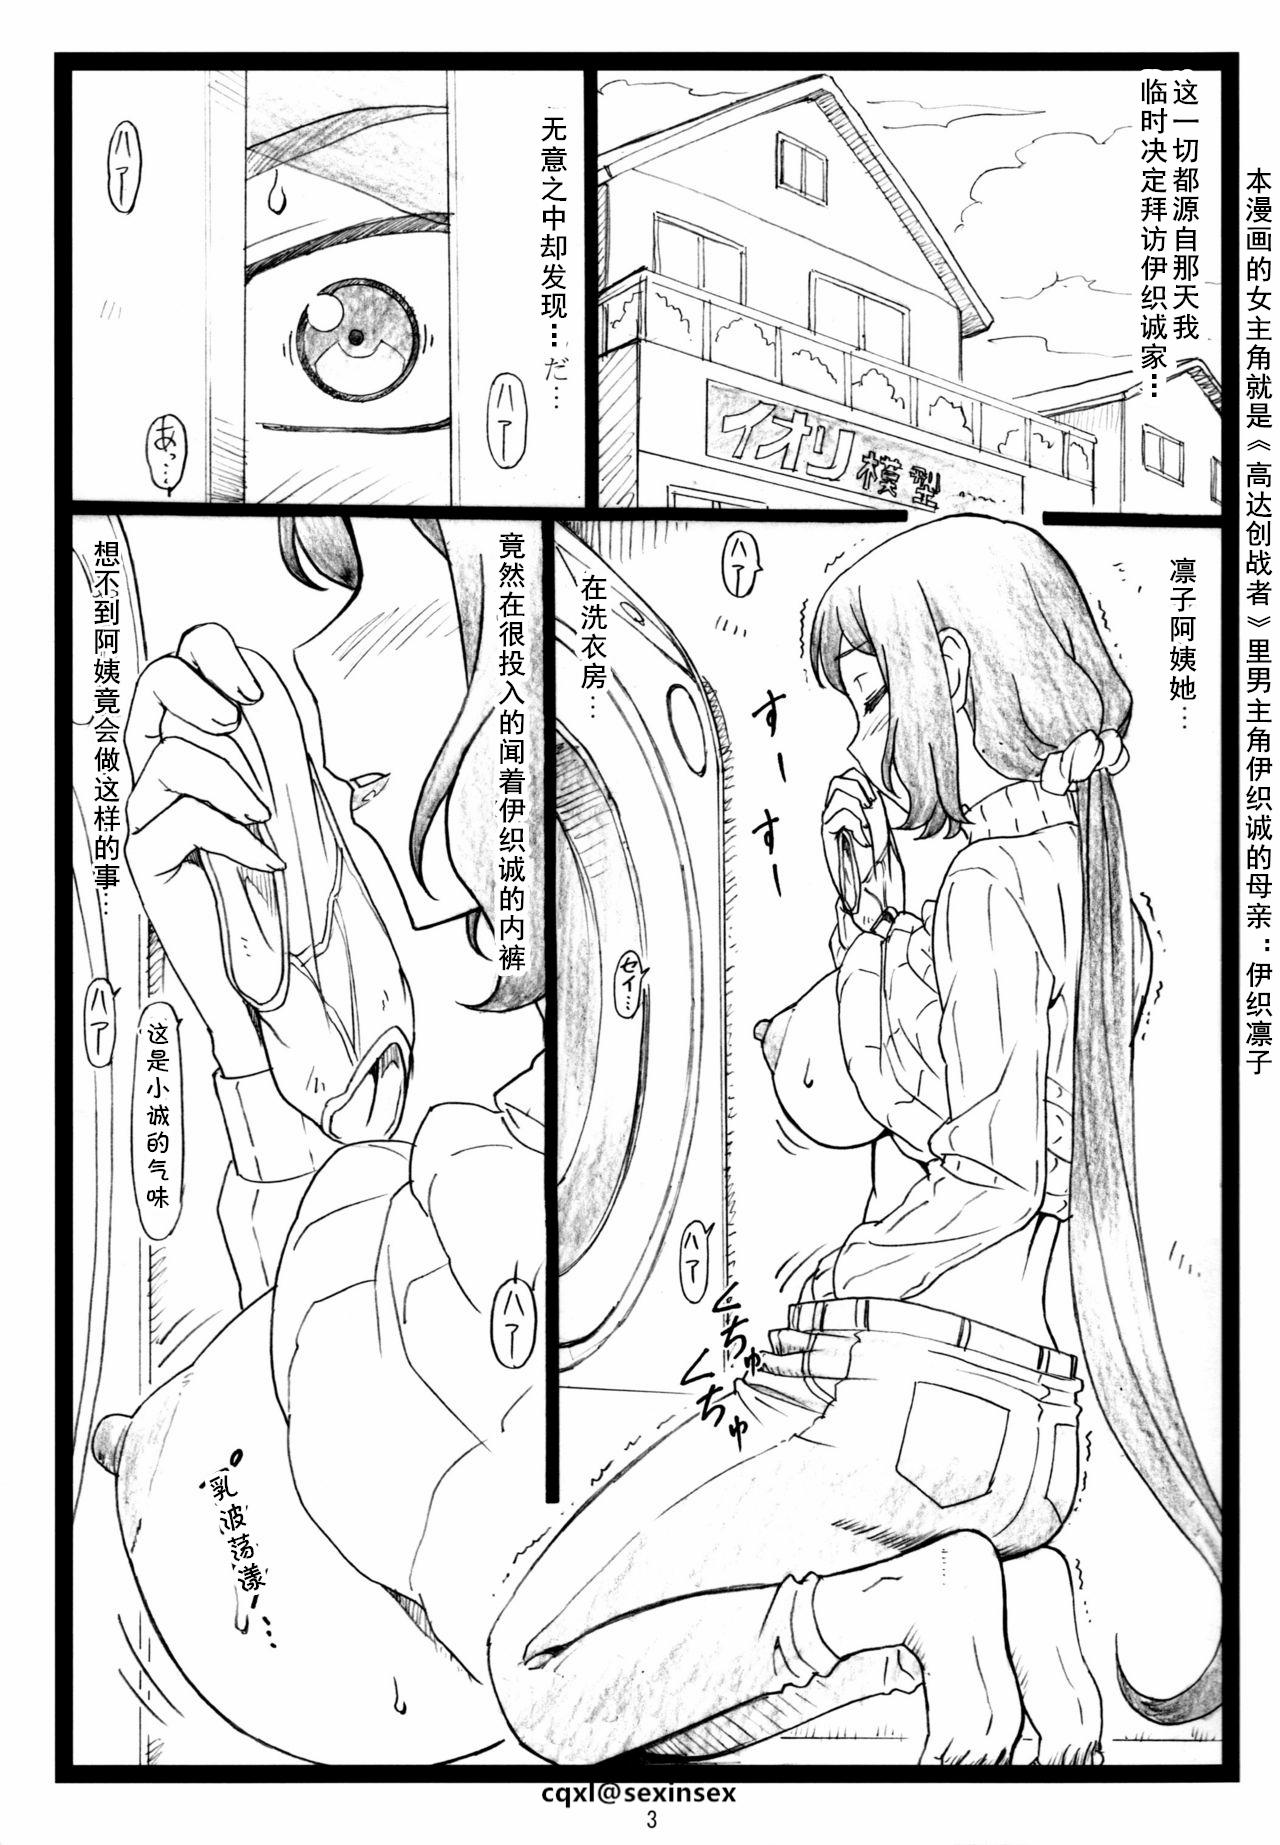 Scandal G...M - Gundam build fighters Sexo Anal - Page 2